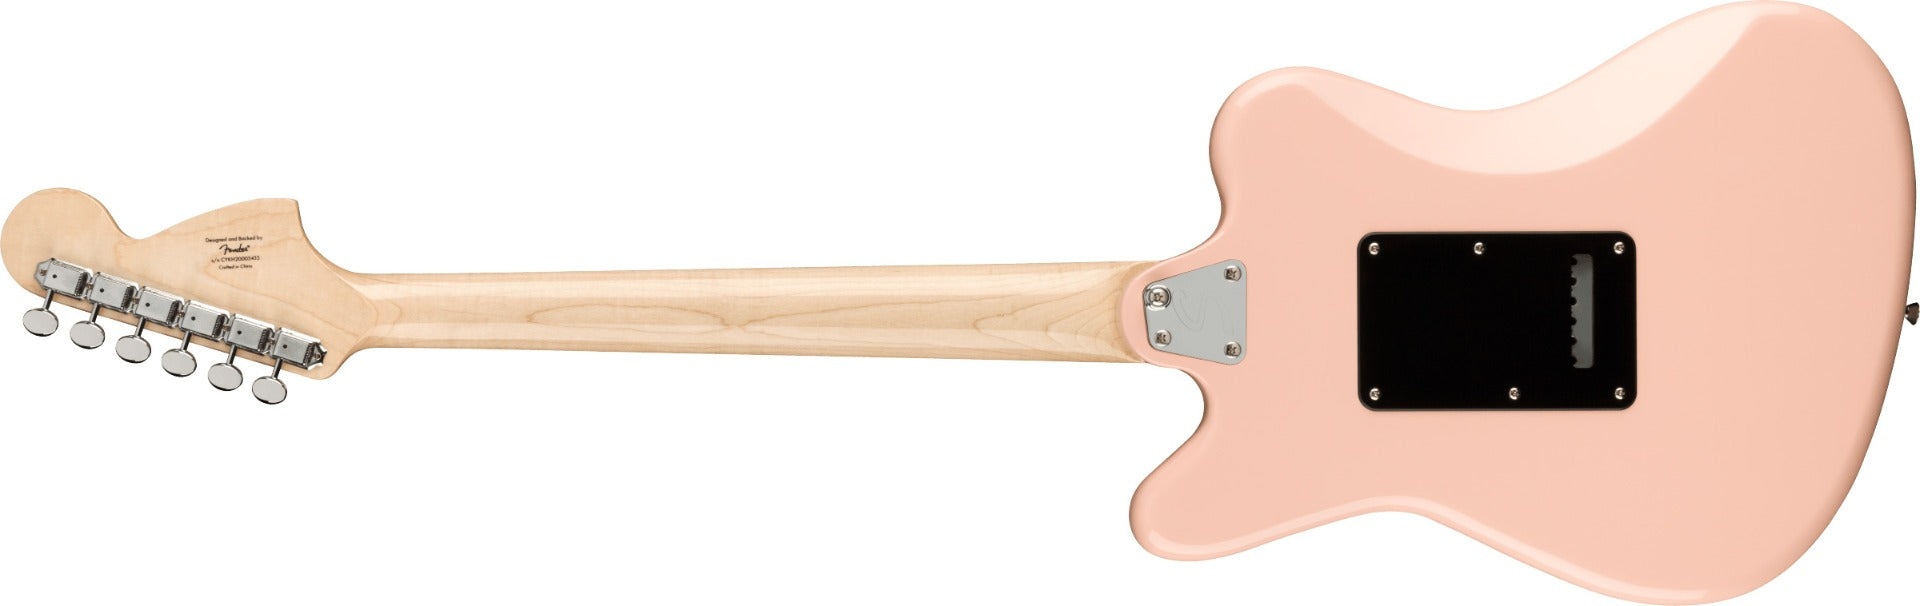 Squier Paranormal Super-Sonic - Laurel, Shell Pink